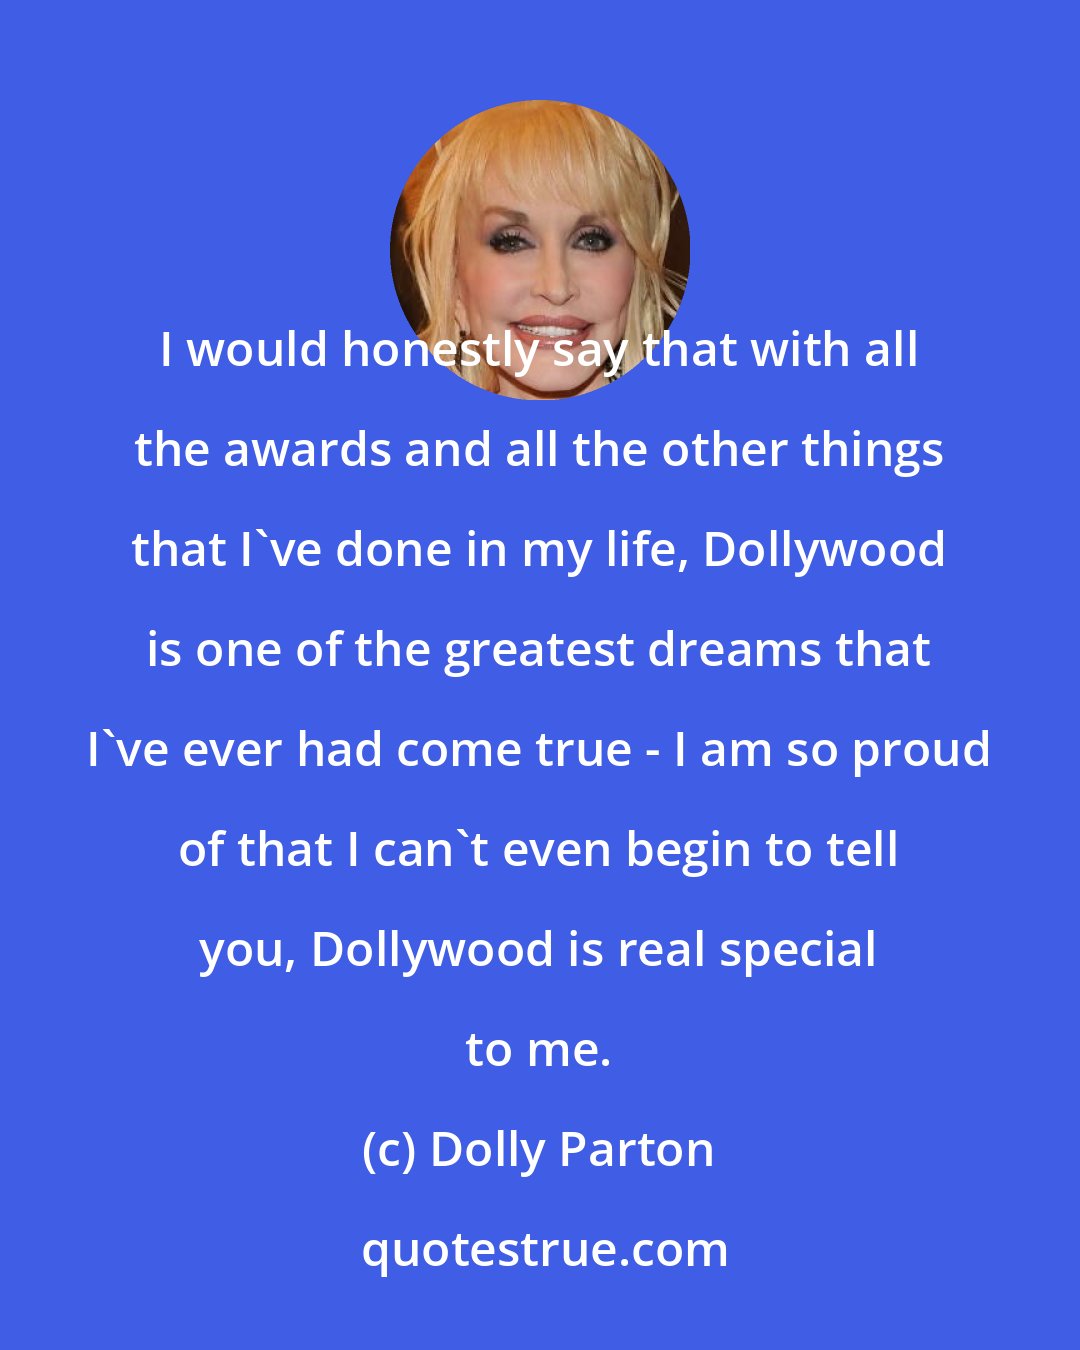 Dolly Parton: I would honestly say that with all the awards and all the other things that I've done in my life, Dollywood is one of the greatest dreams that I've ever had come true - I am so proud of that I can't even begin to tell you, Dollywood is real special to me.